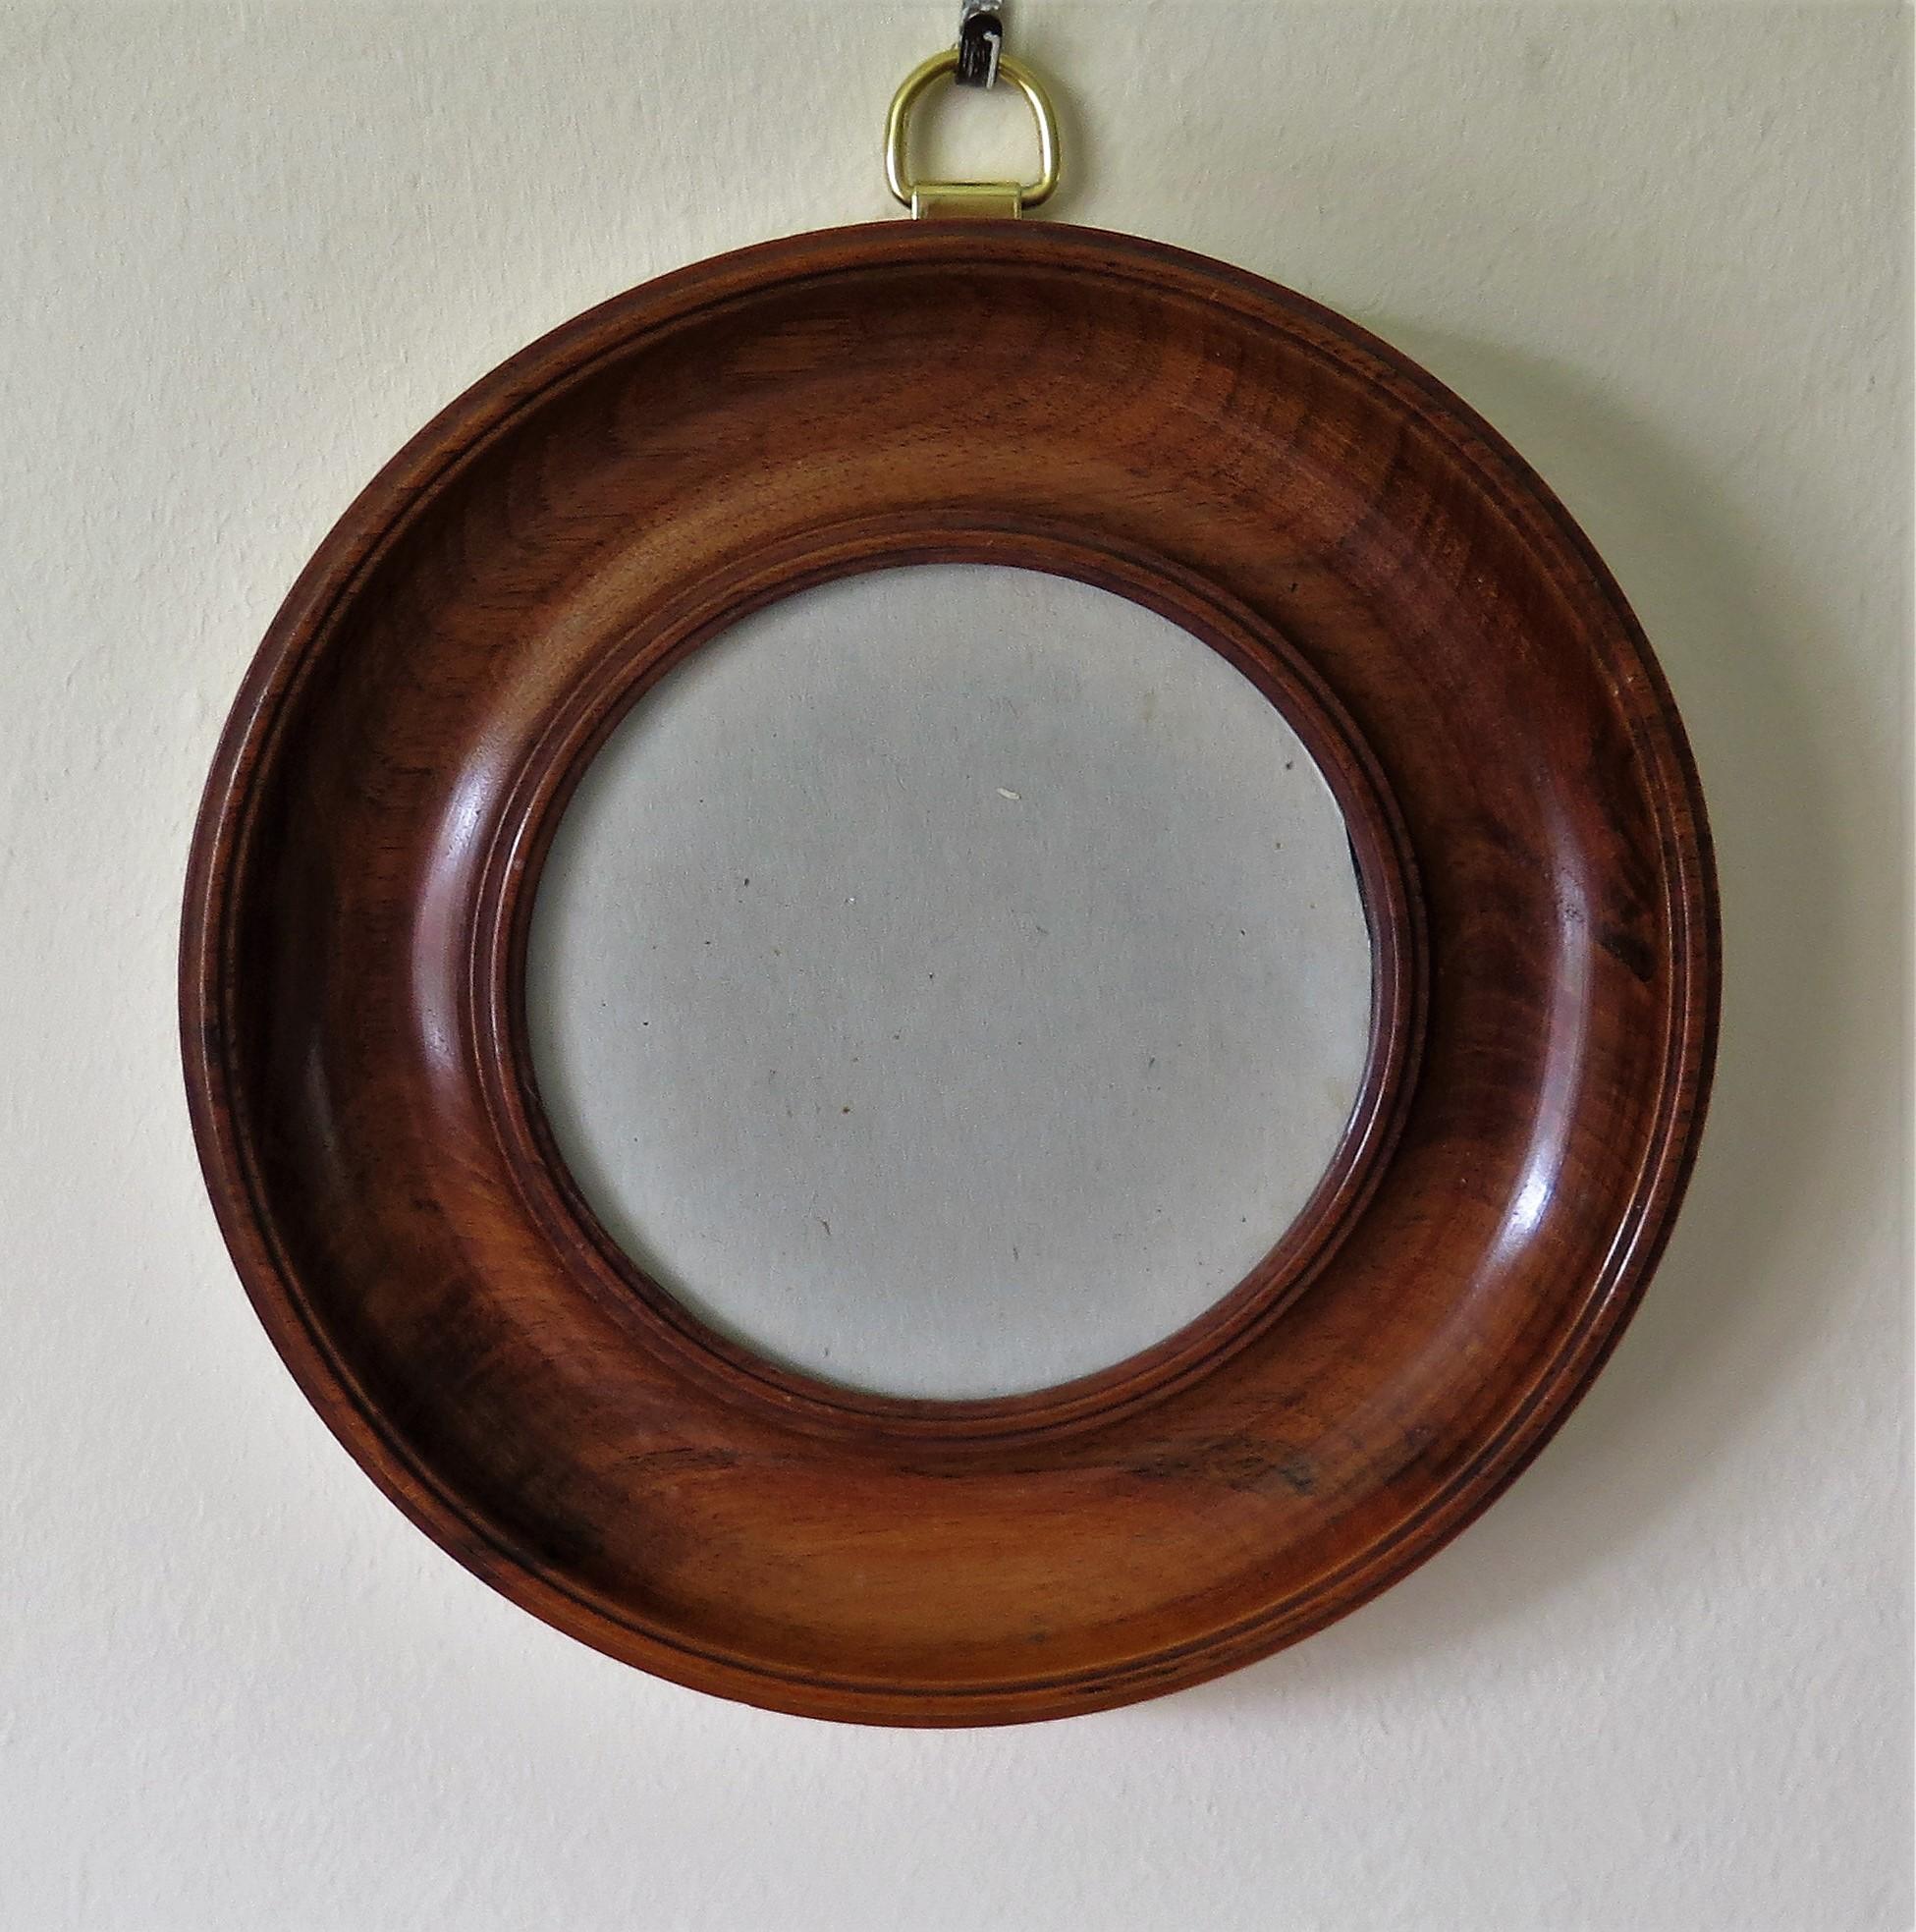 This is a small, wall hanging, picture or photograph frame made of hand-turned solid Mahogany and dating to the English Victorian period, circa 1870.

The frame is made of solid mahogany which has patinated to give a lovely mellow color and with a